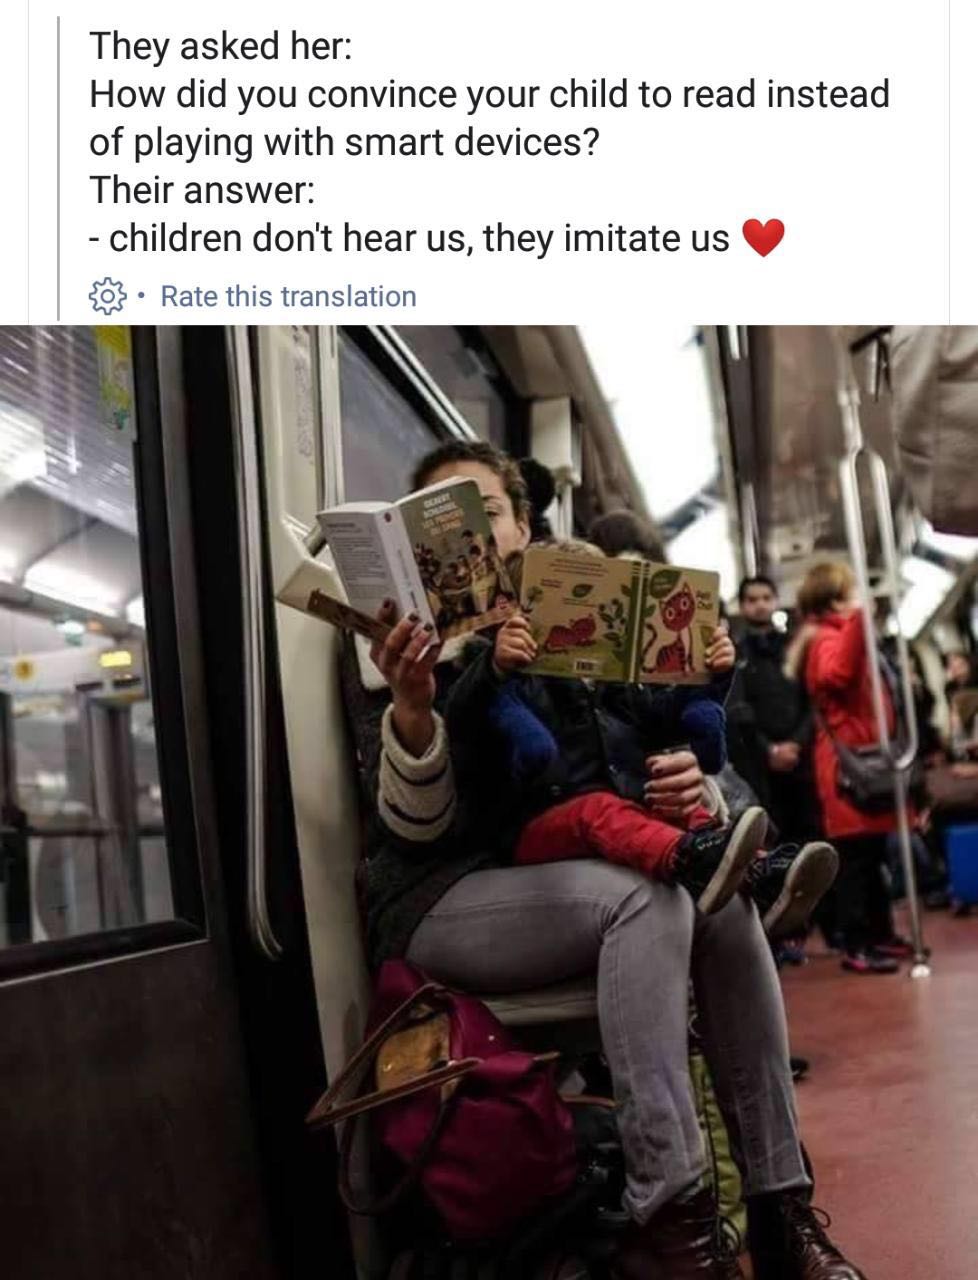 memes - children don t hear us they imitate us - They asked her How did you convince your child to read instead of playing with smart devices? Their answer children don't hear us, they imitate us o Rate this translation